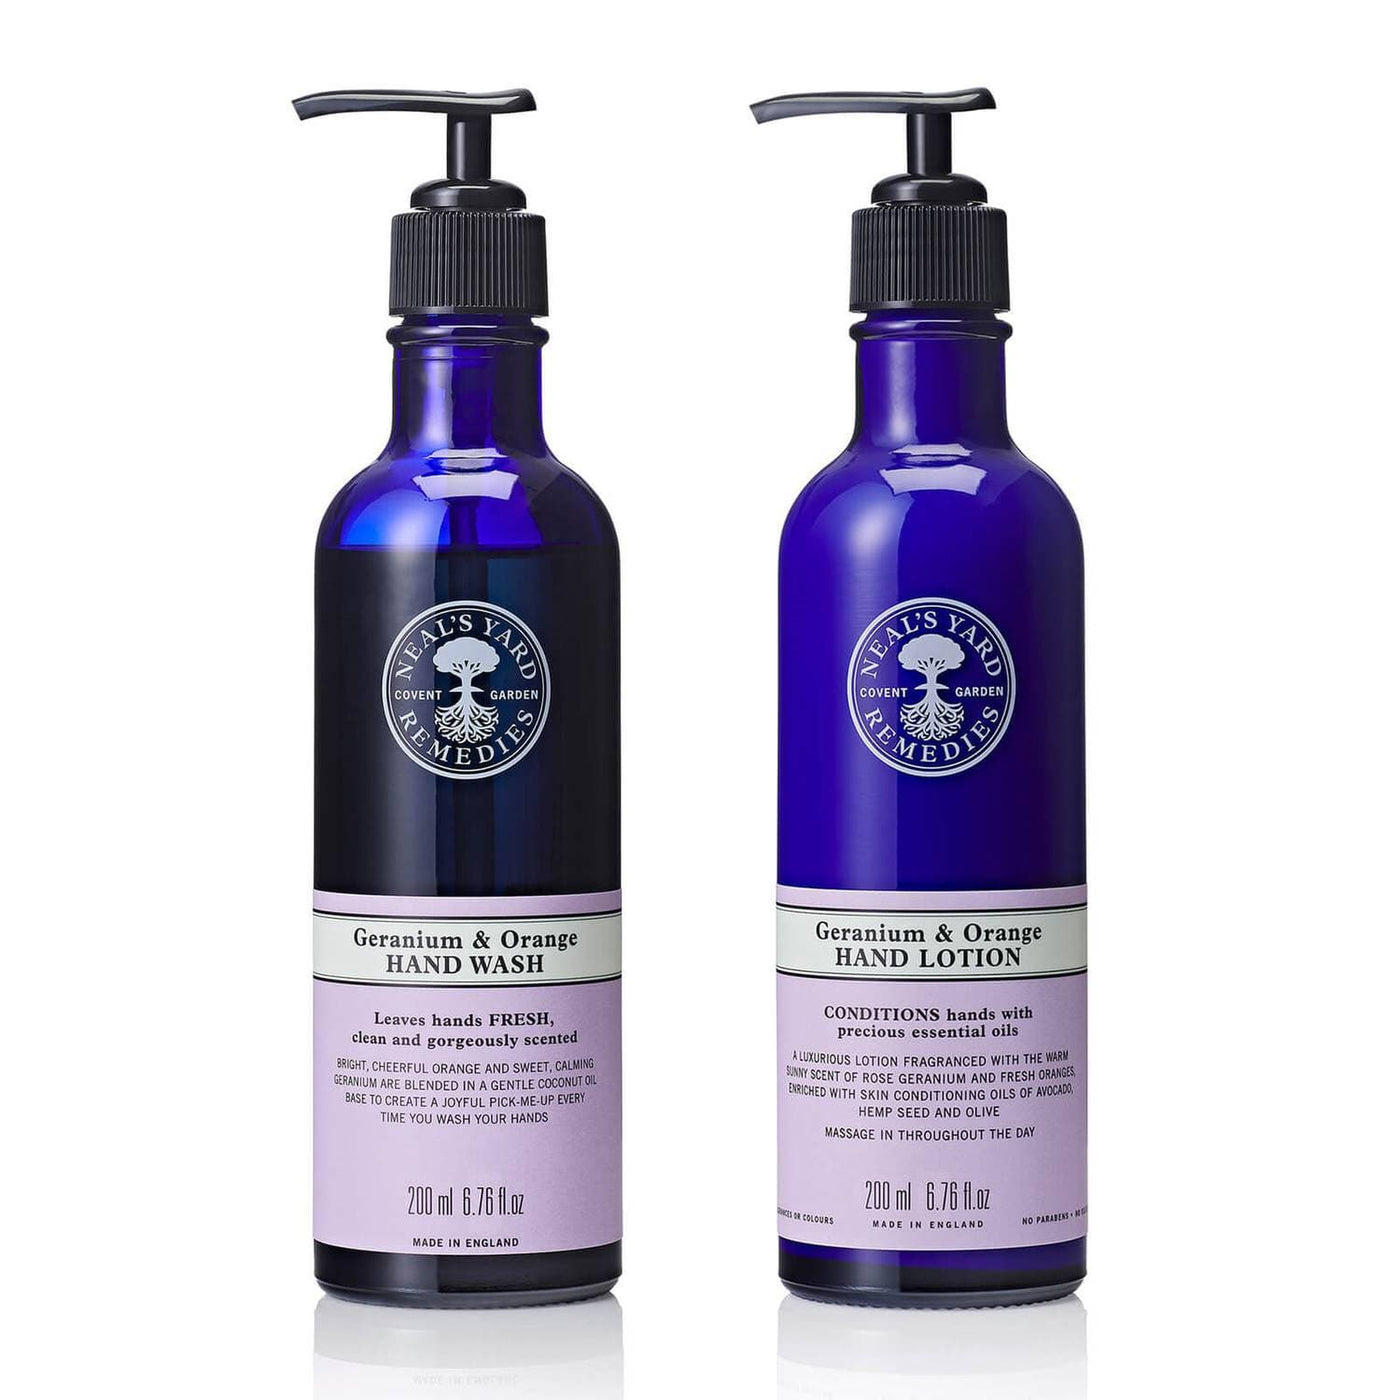 Neal's Yard Remedies Gifts & Collections Uplifting Handcare Duo